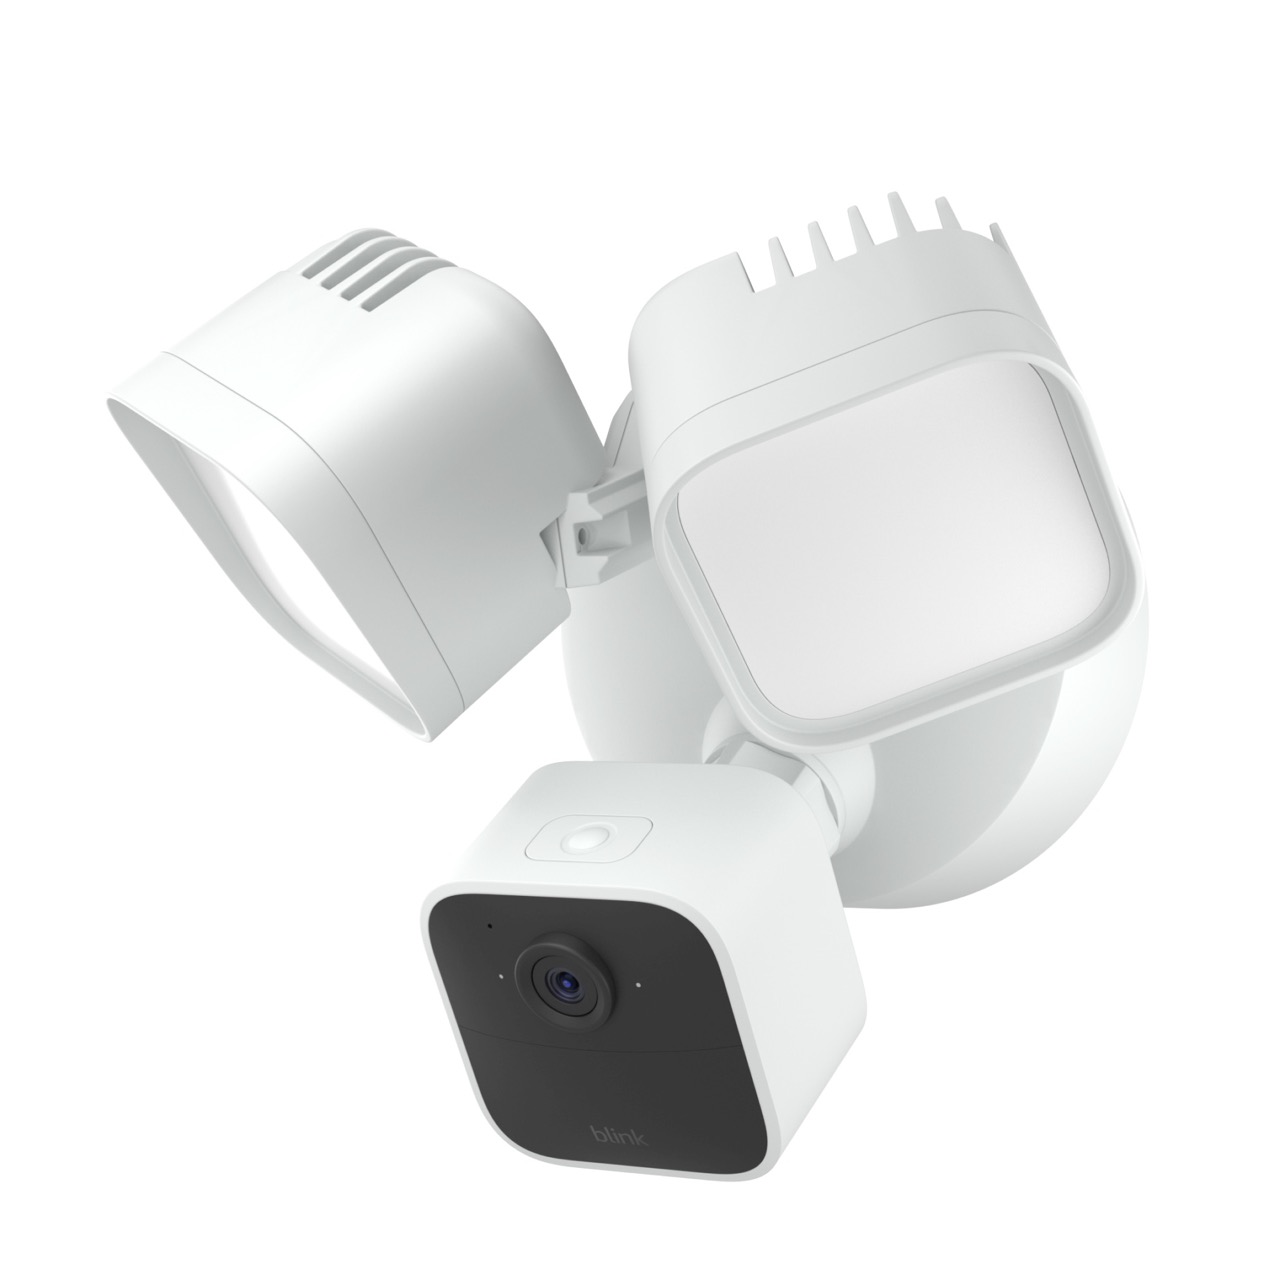 Amazon sheds light on your potential intruders with Blink Floodlight • TechCrunch